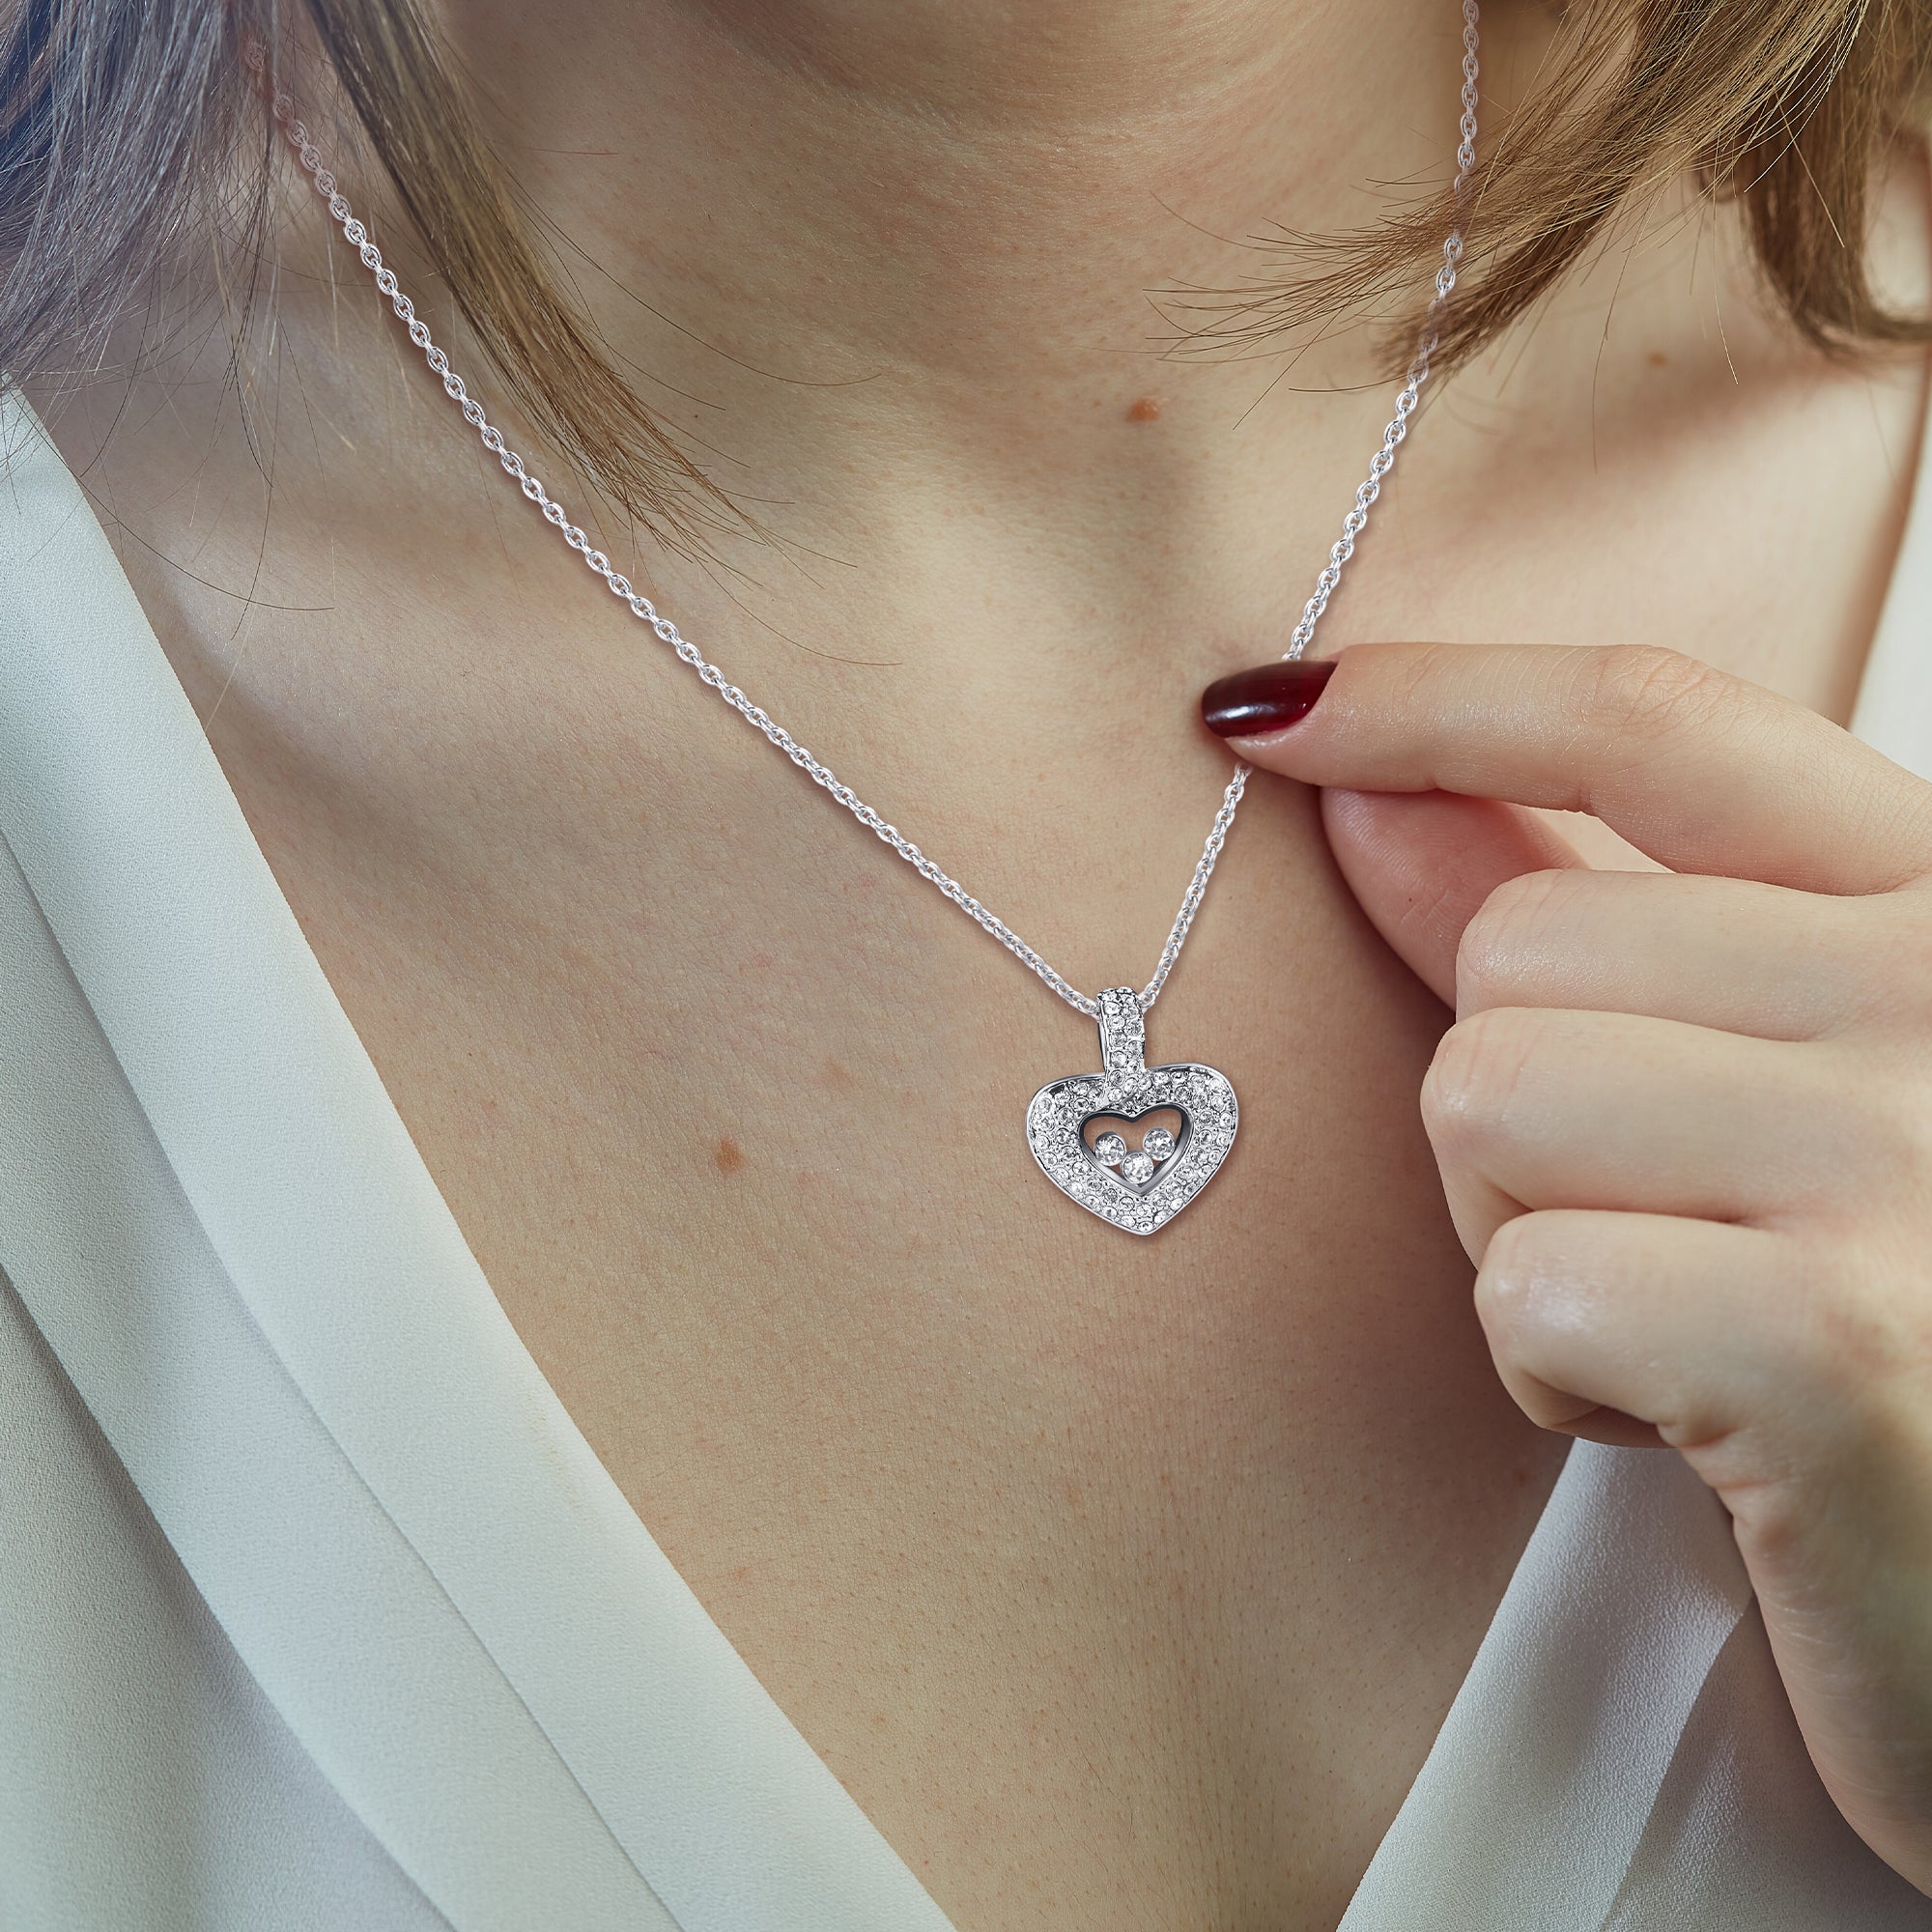 To My Wonderful Daughter-in-Law - You Are My Bonus Daughter - Tryndi Floating Heart Necklace